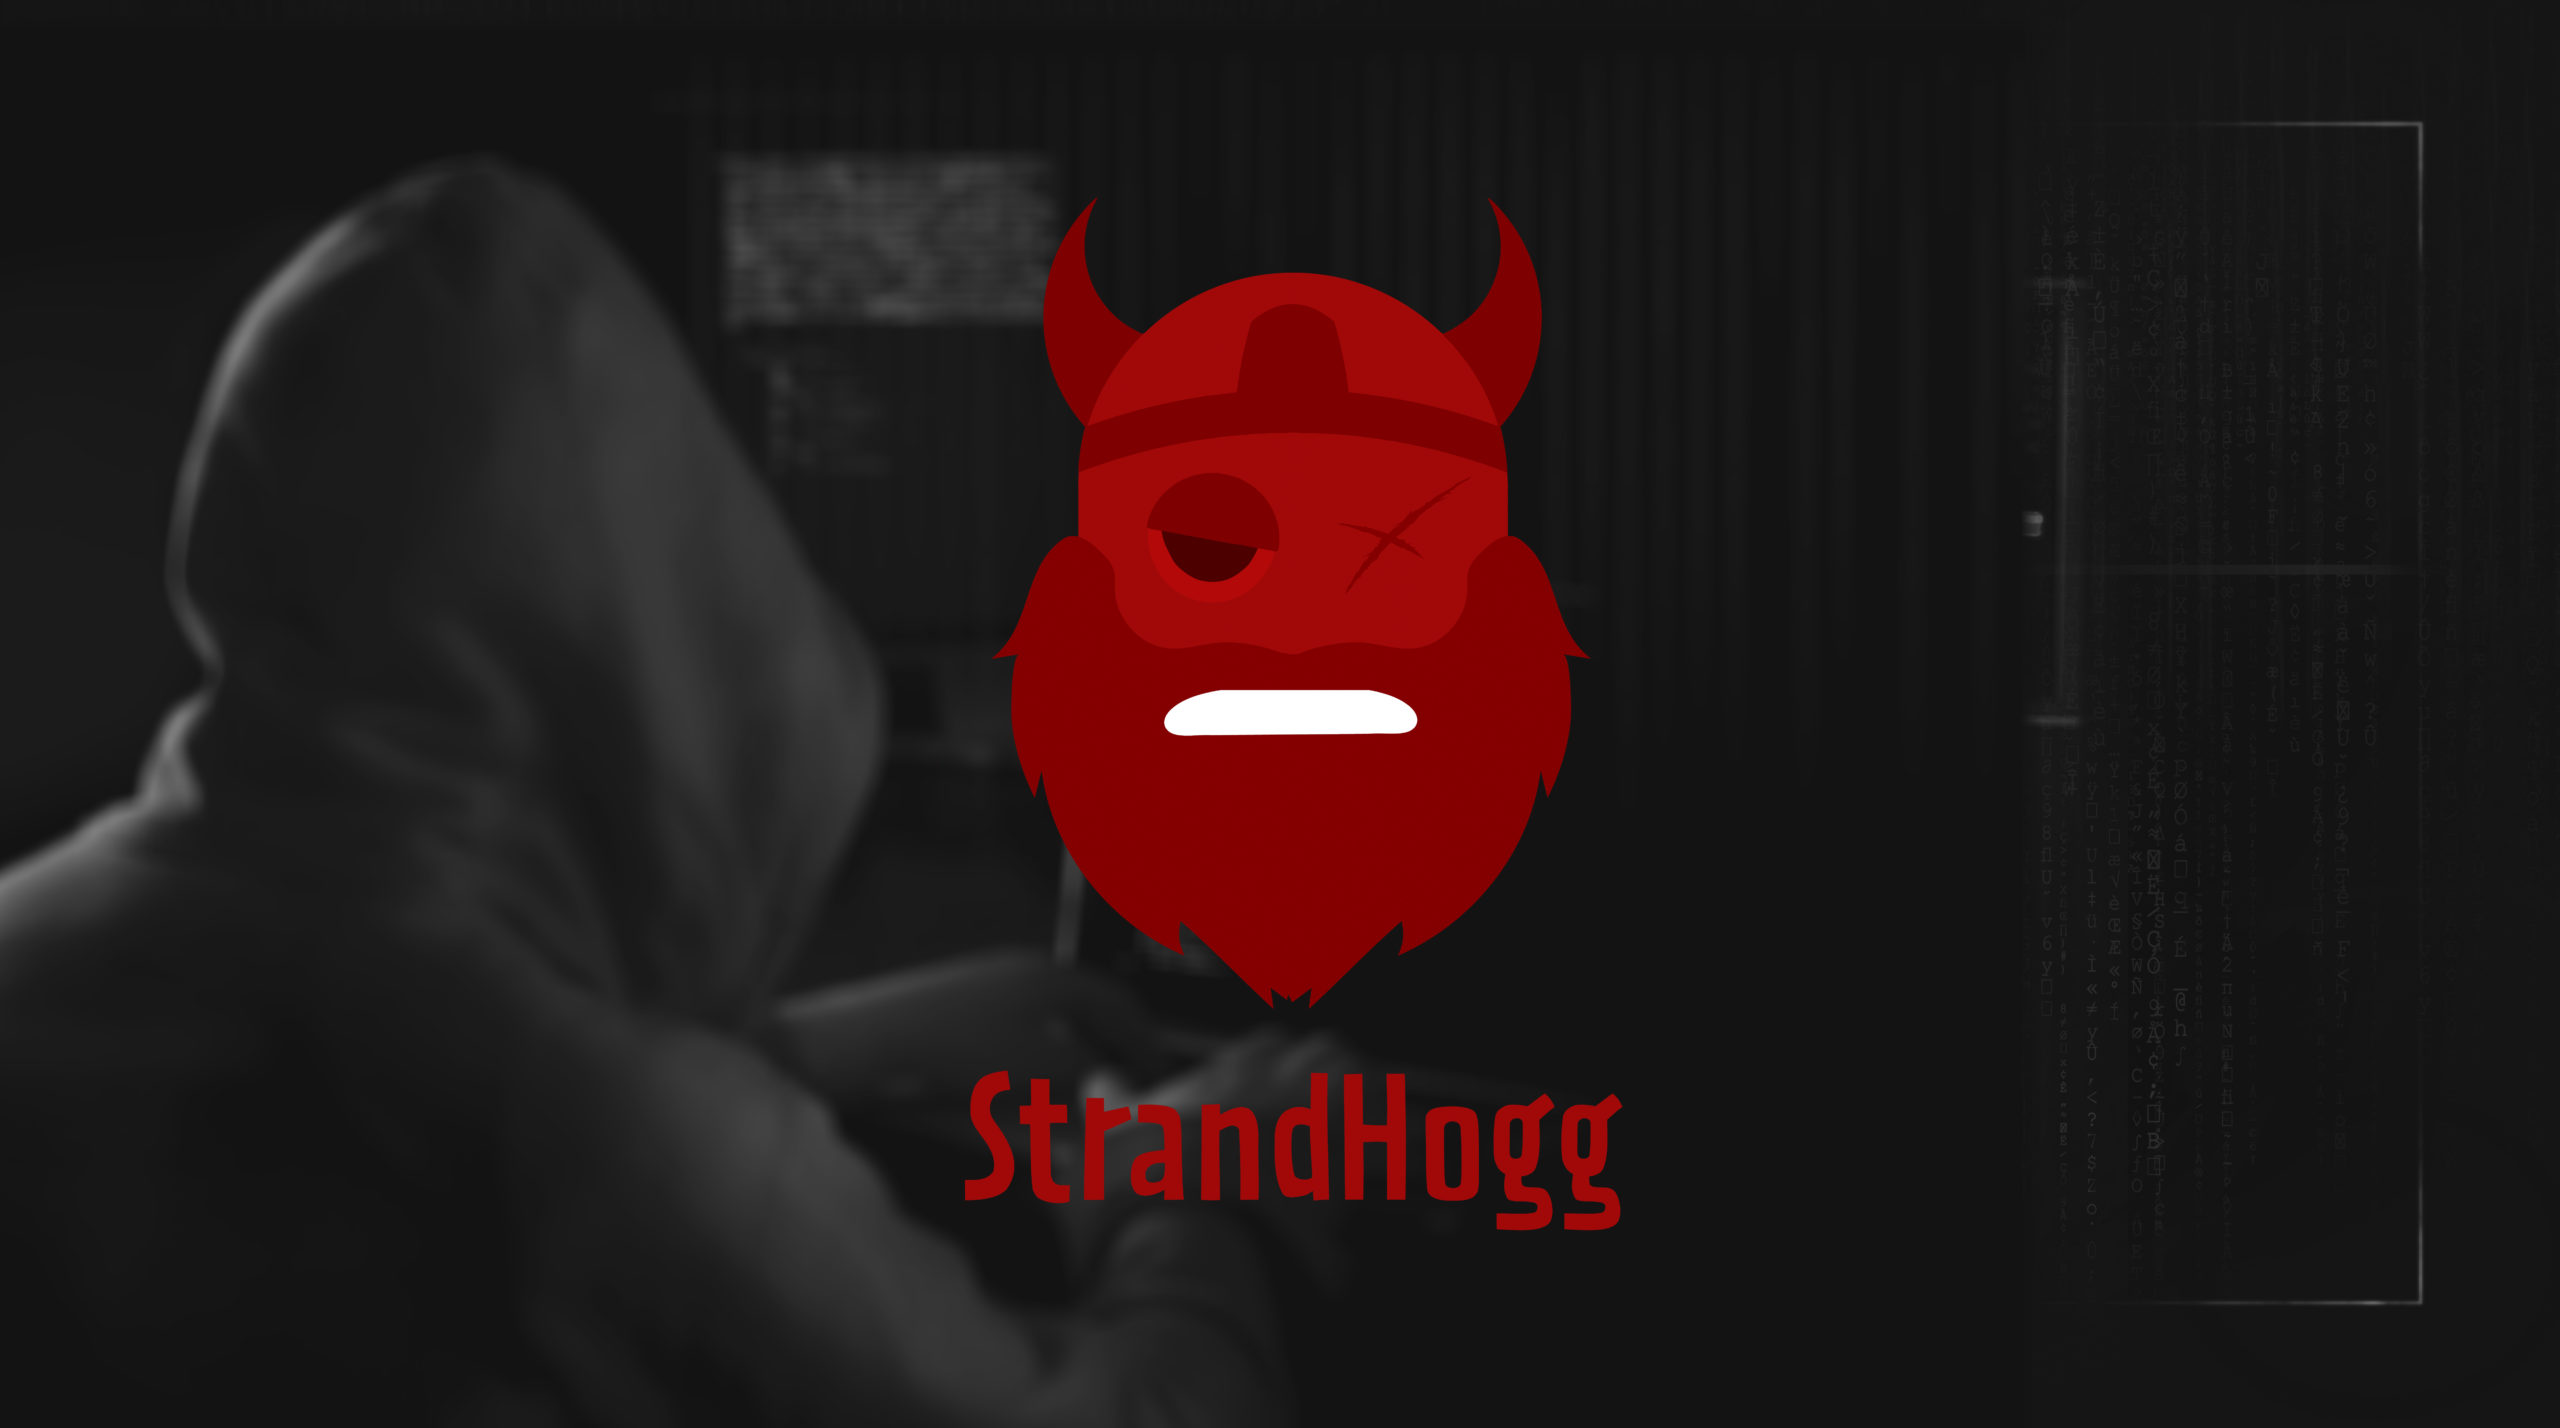 StrandHogg 2.0 – New serious Android vulnerability